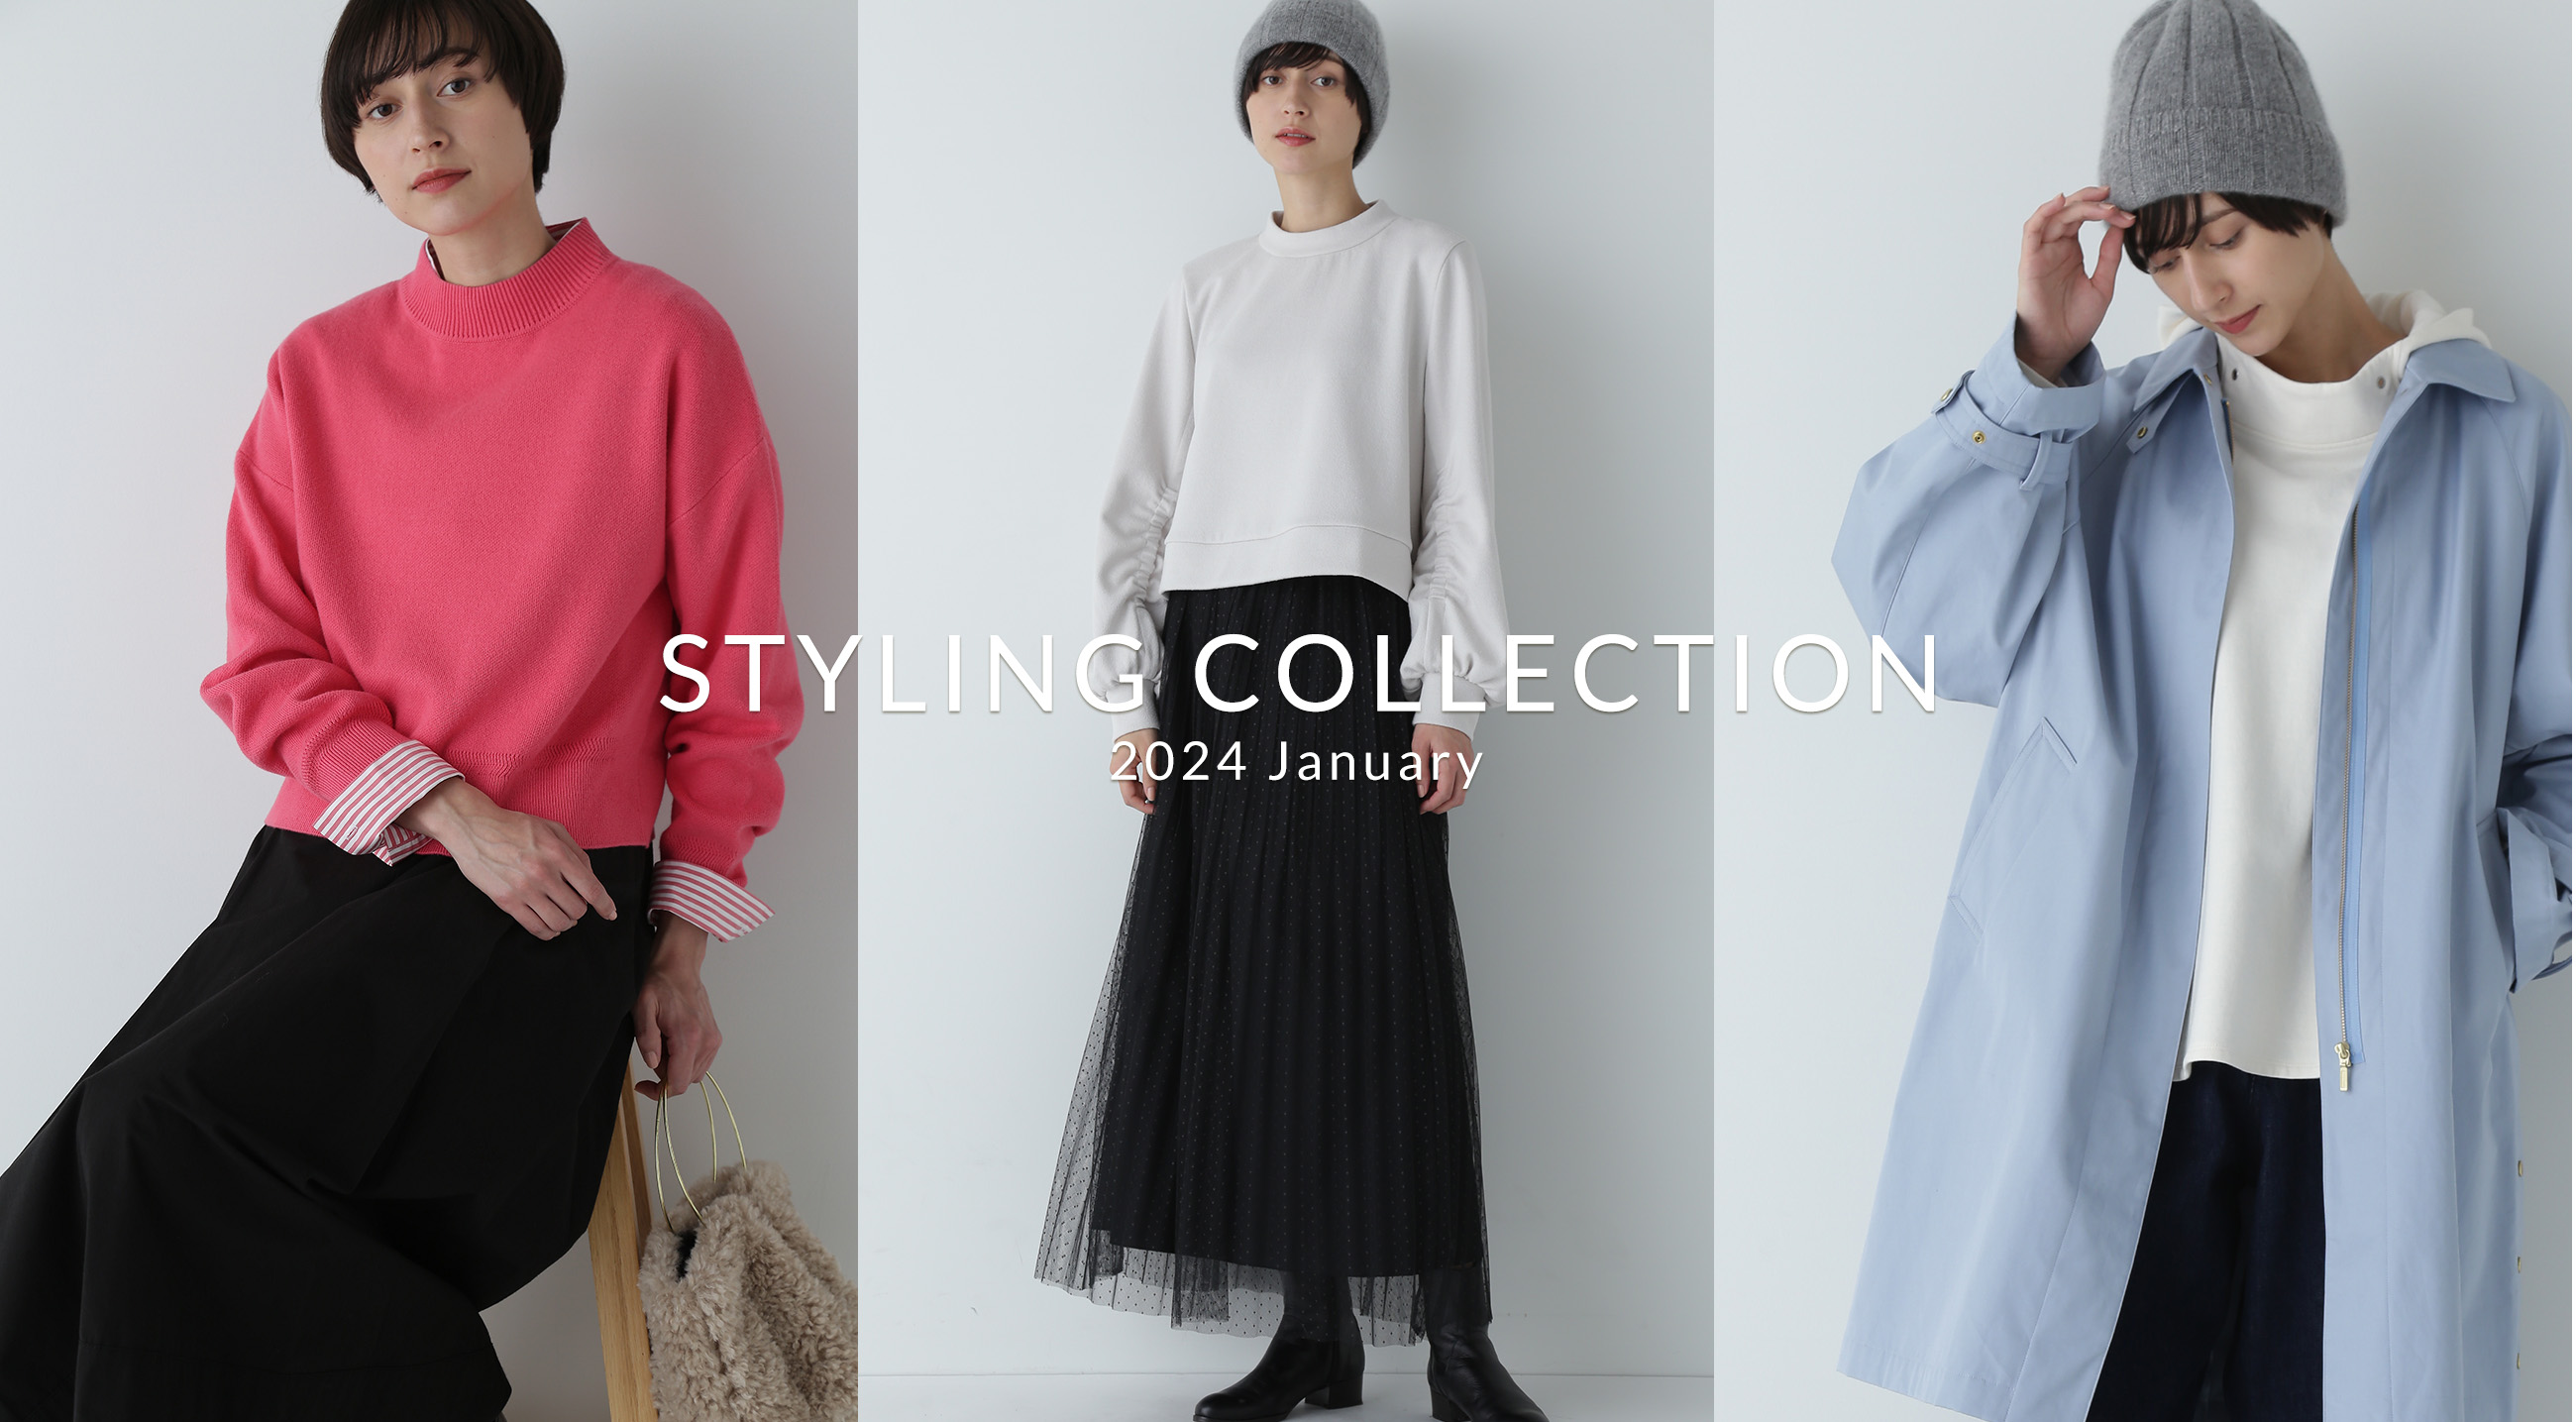 Styling Collection 2024 January